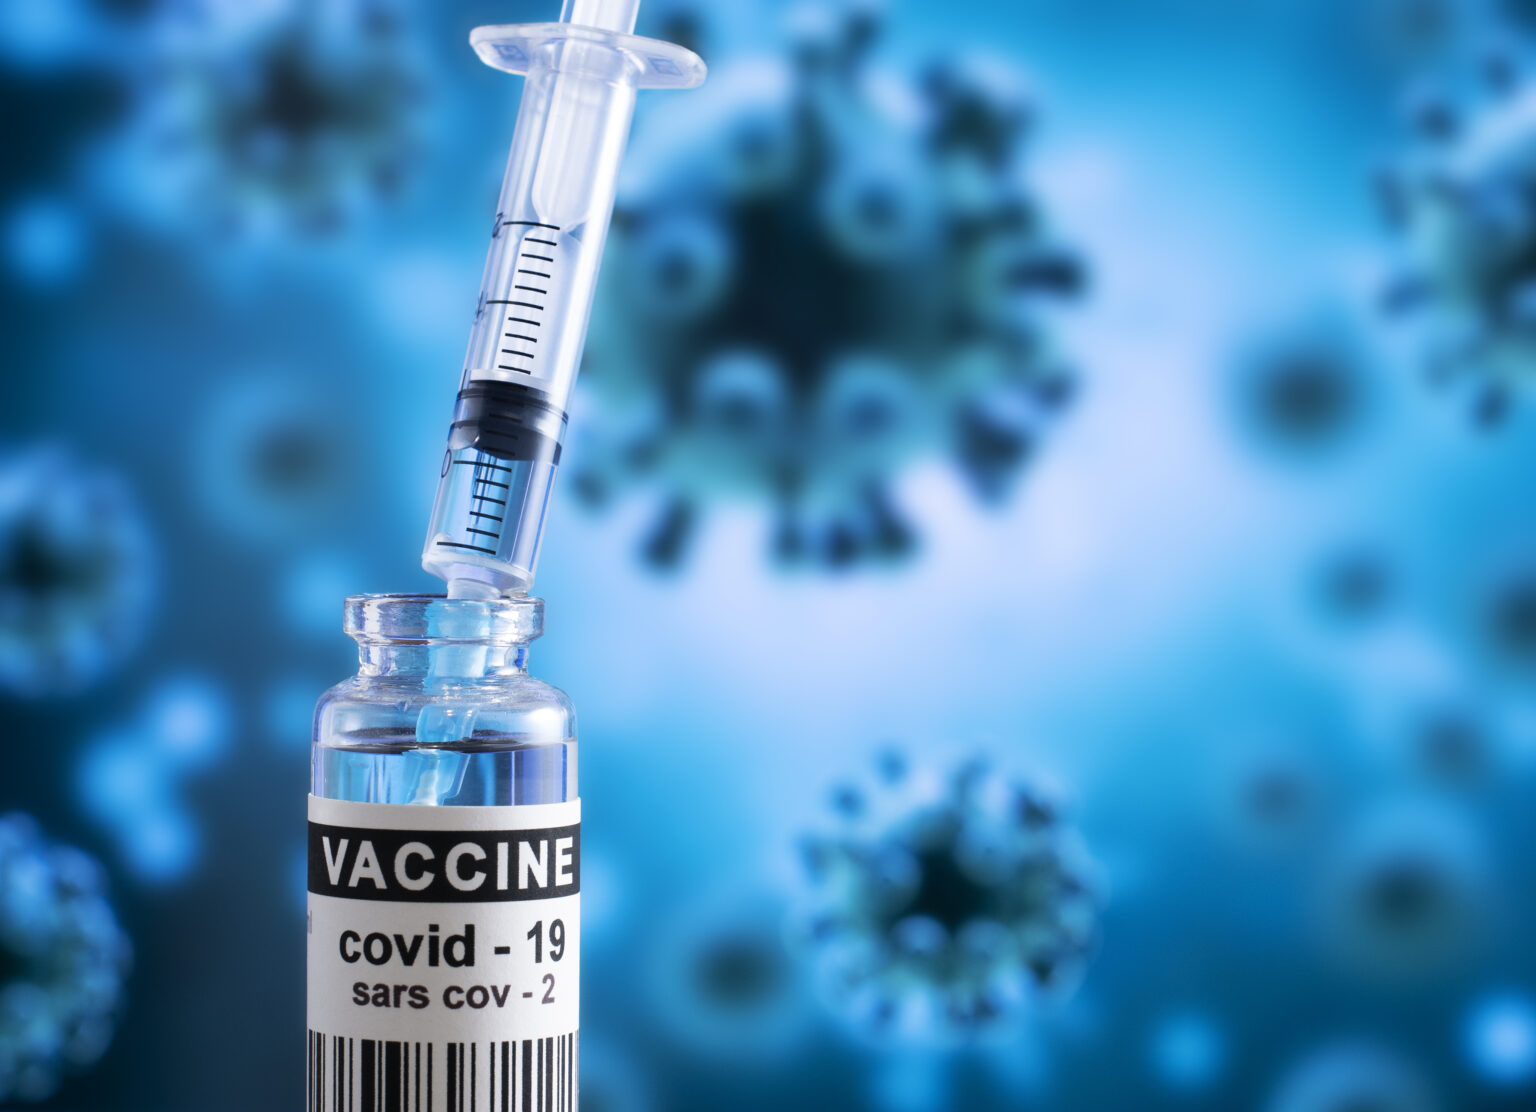 Why We Must Address Needle Fear to Achieve Herd Immunity – And Beyond